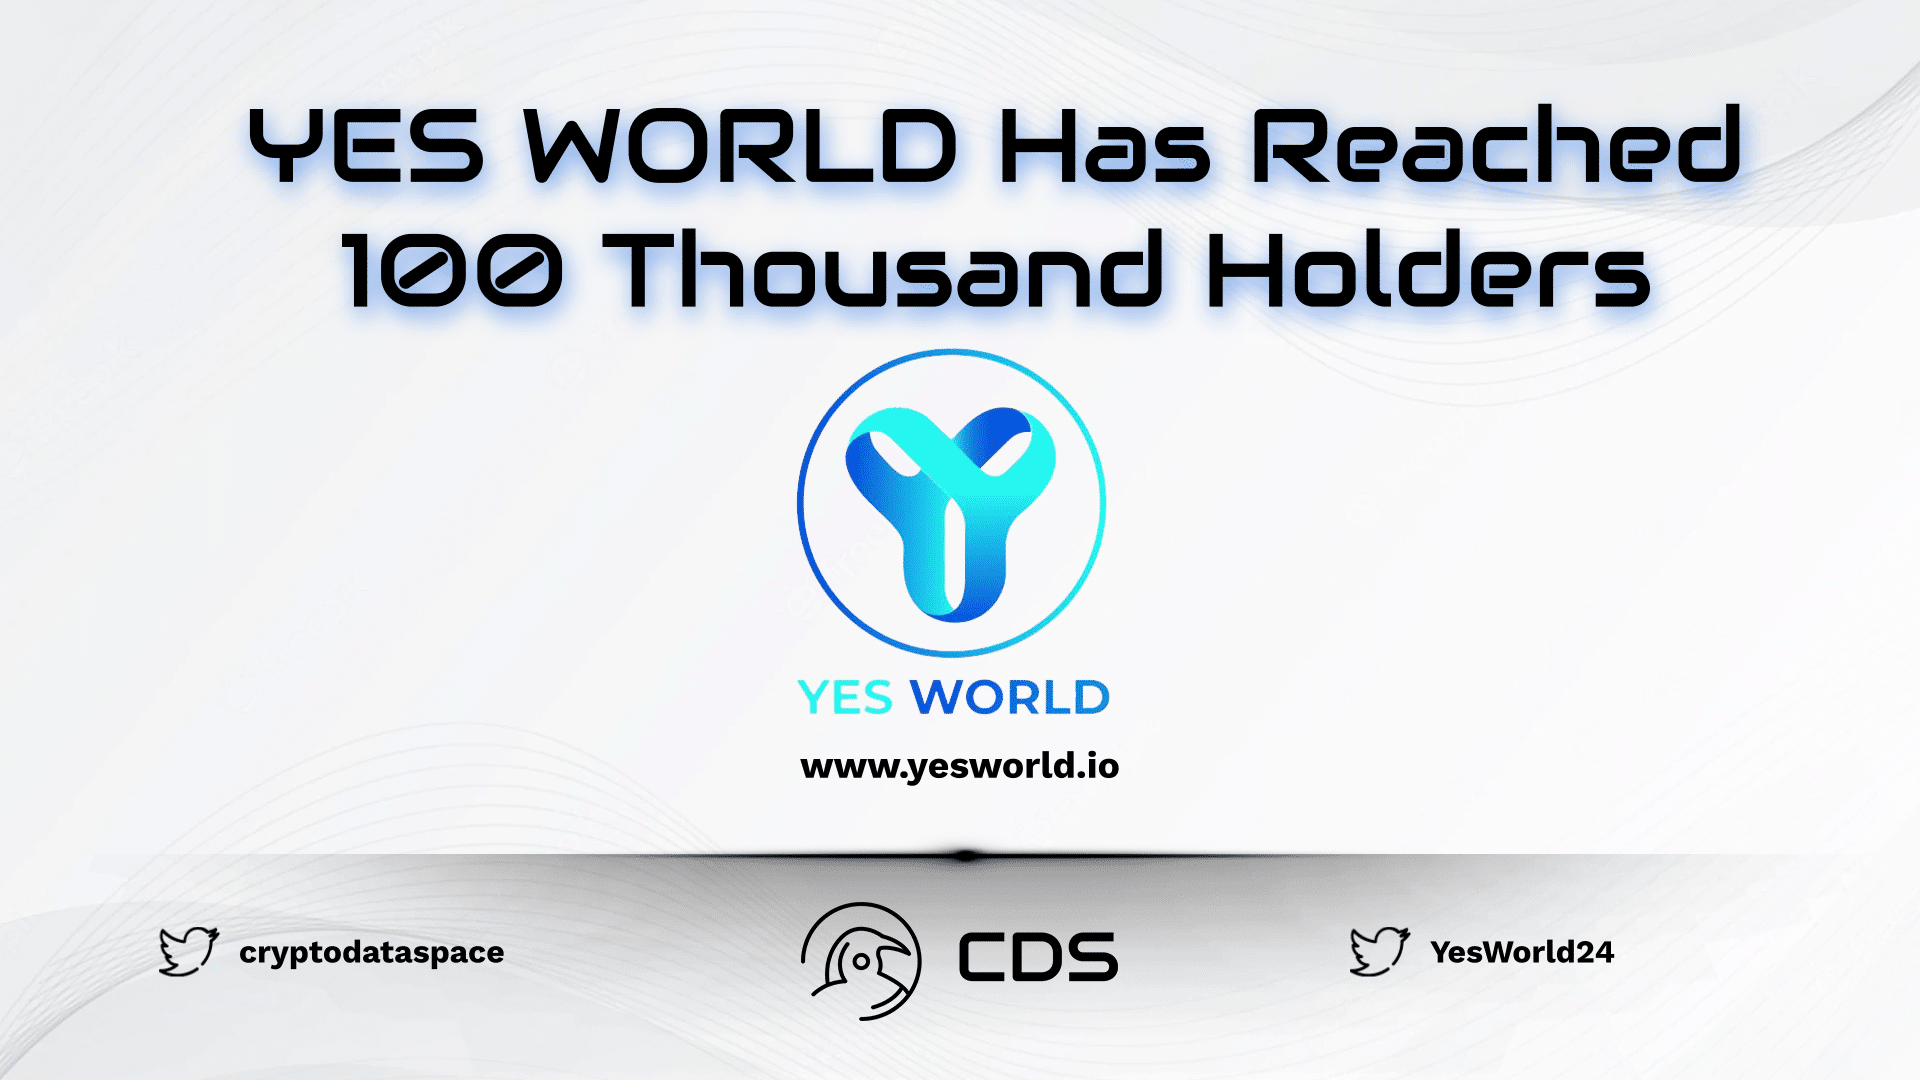 YES WORLD Has Reached 100 Thousand Holders